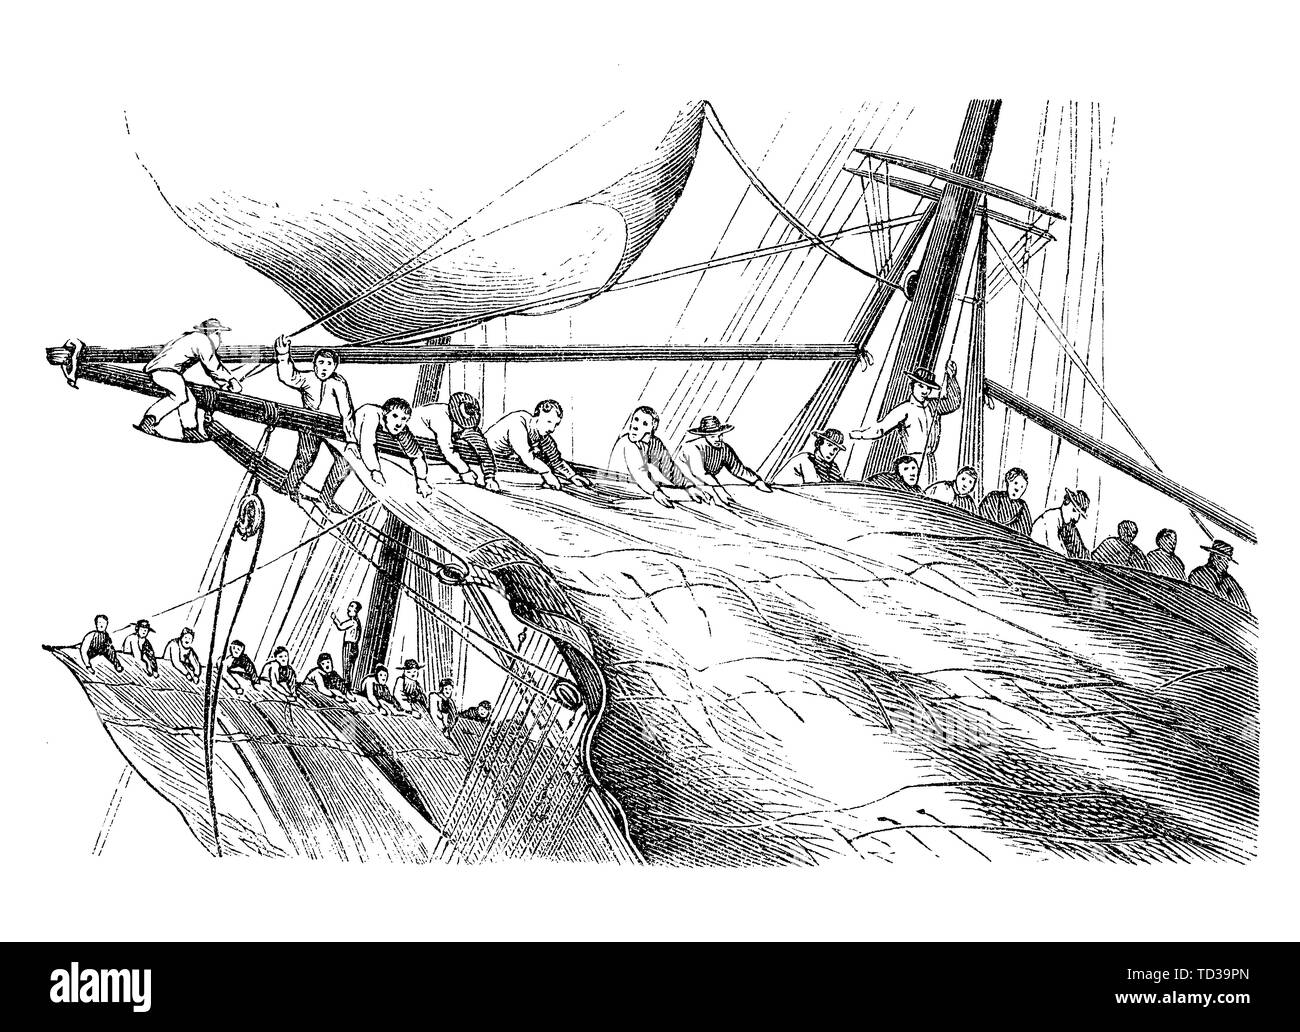 Sailors climbing on the masts recover and reduce the sails against the strong wind Stock Photo